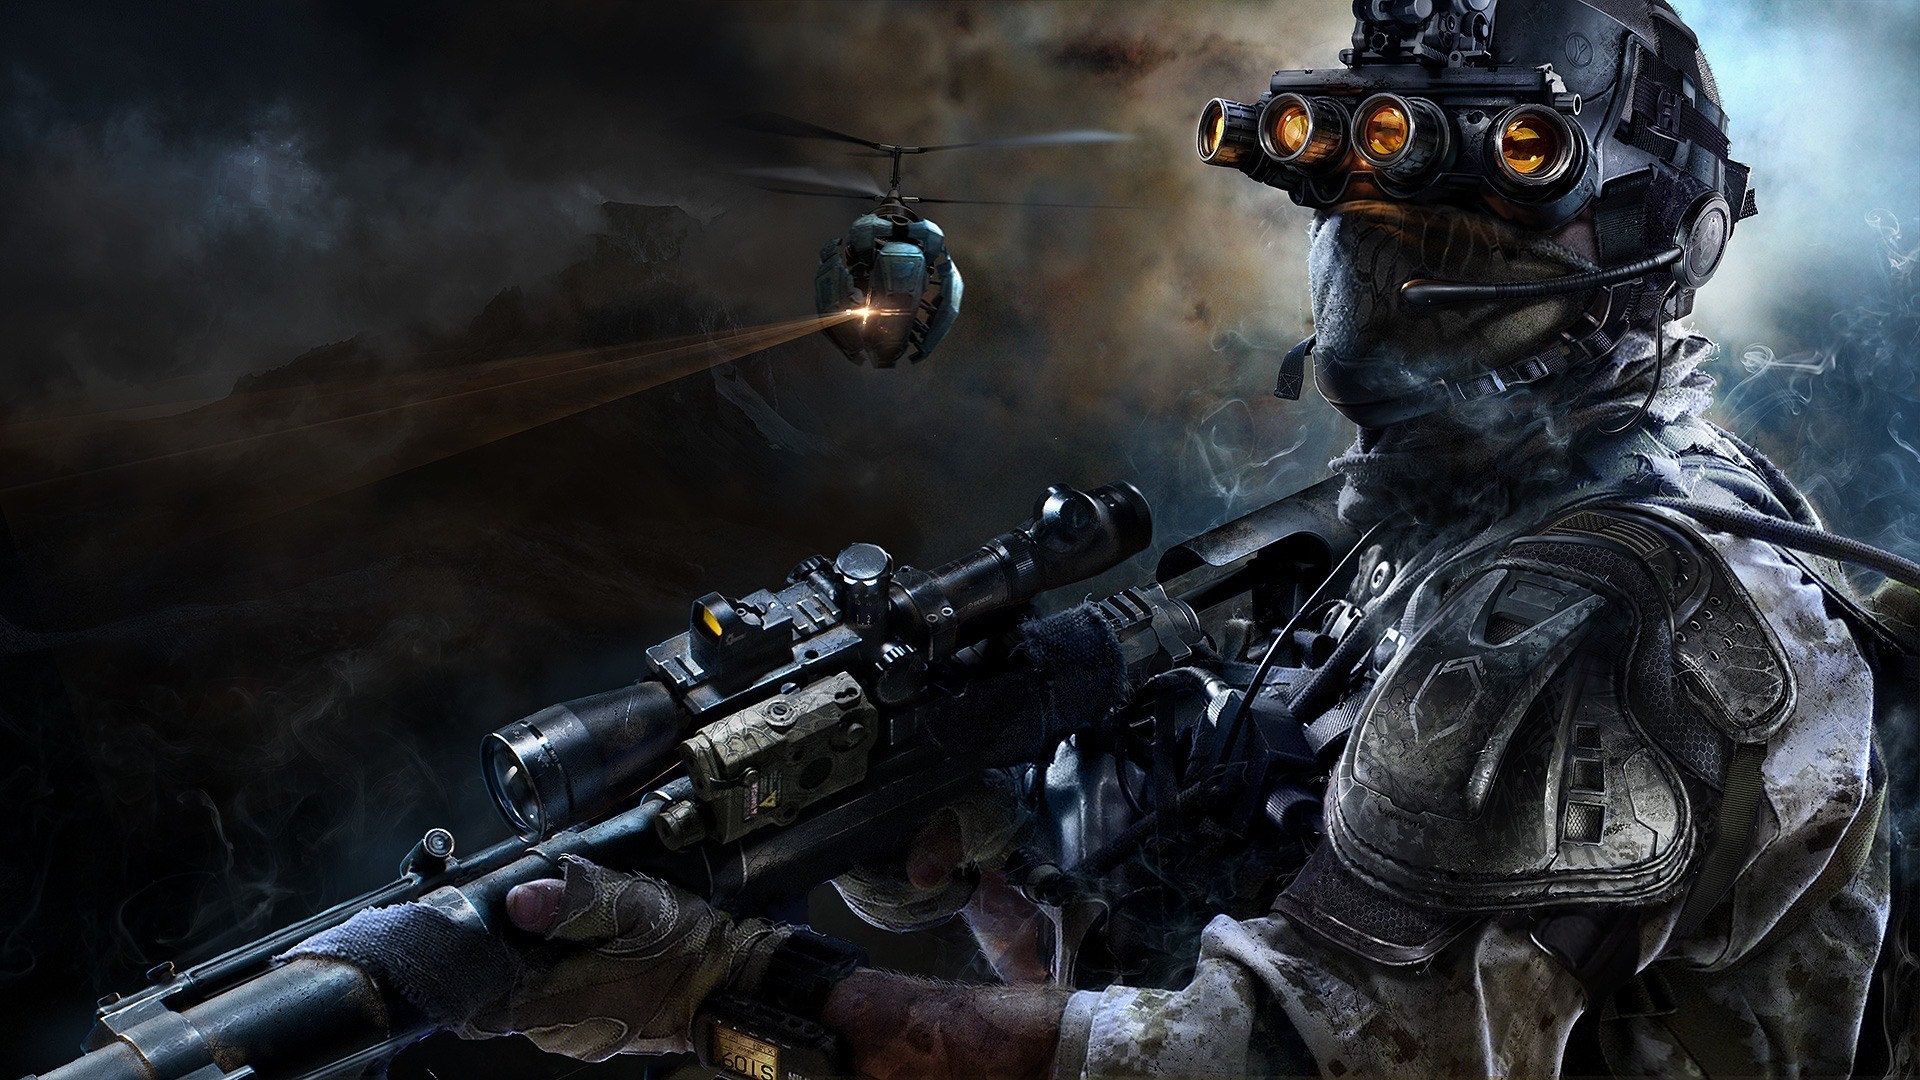 General 1920x1080 video games Sniper Ghost Warrior 3 PC gaming military weapon soldier video game art